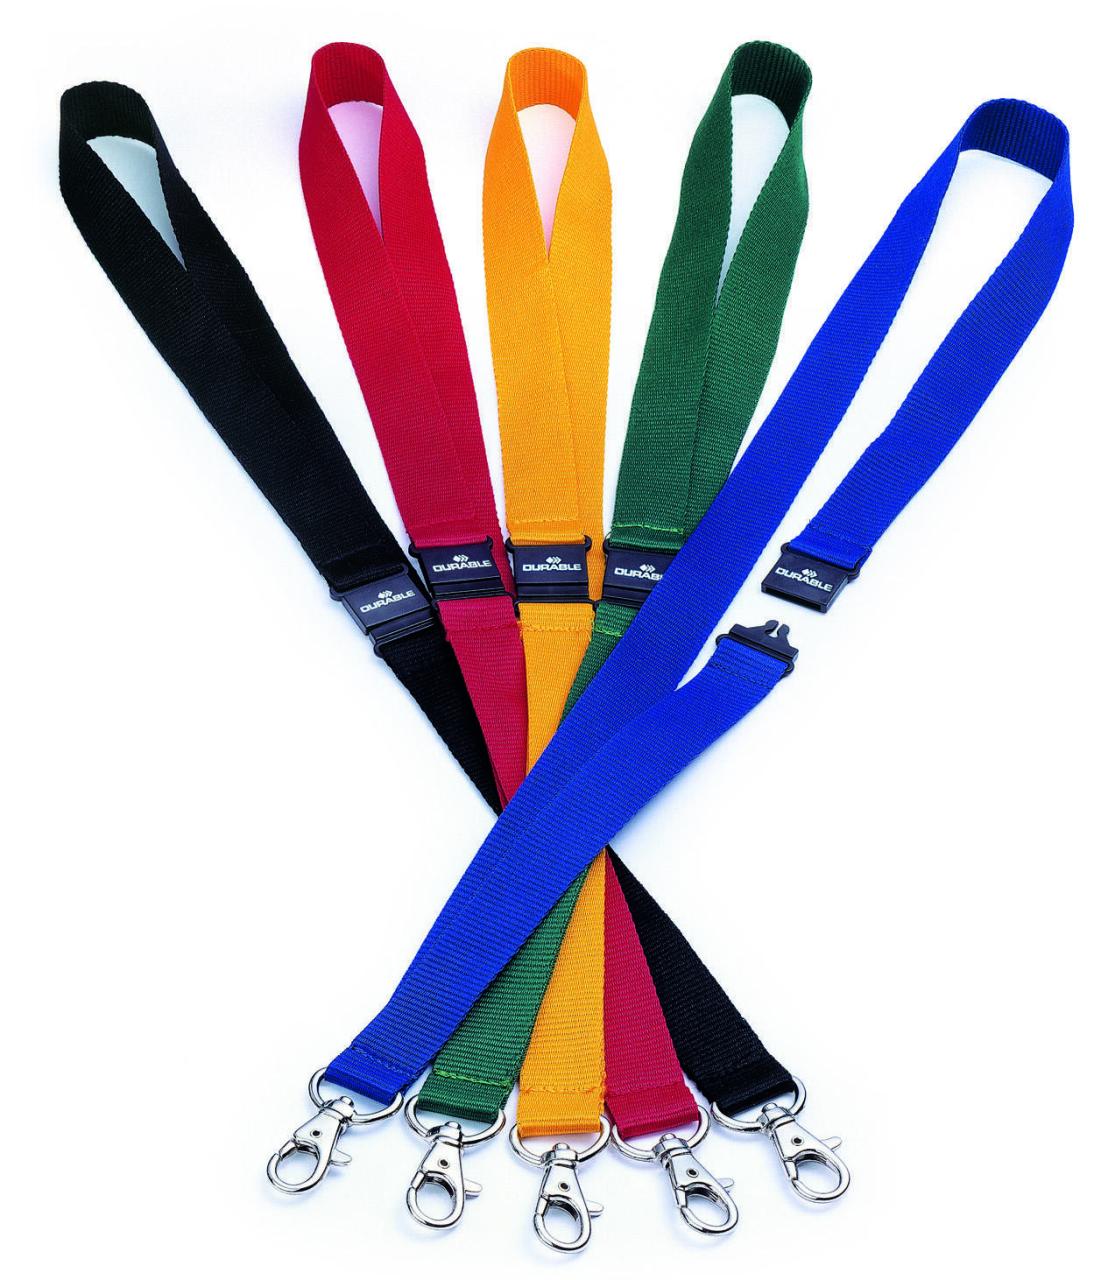 DURABLE Lanyards Durable Textilband 10St. gelb Gelb